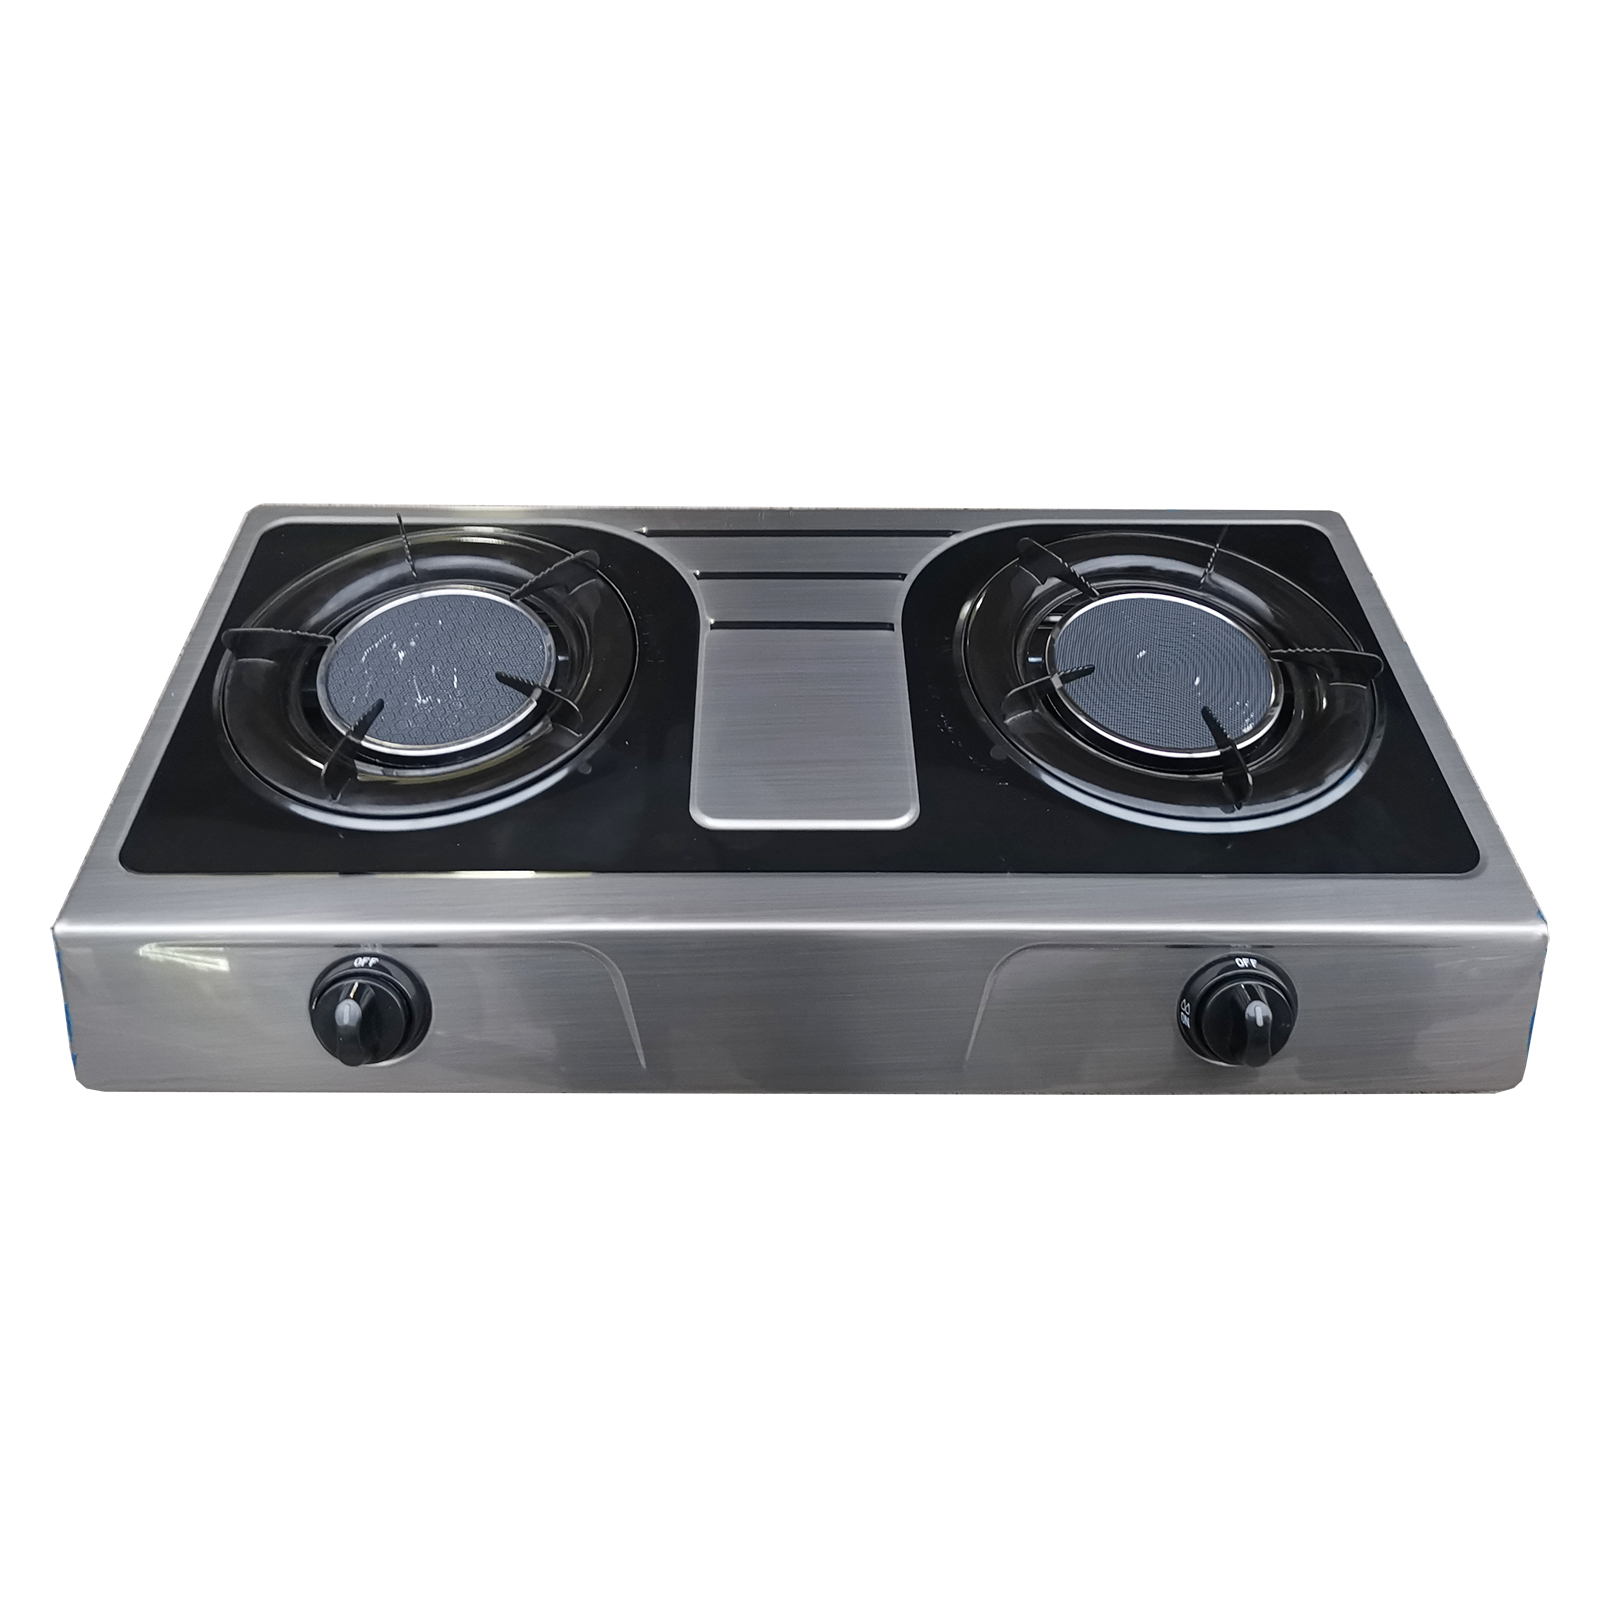 Liquefied gas stove